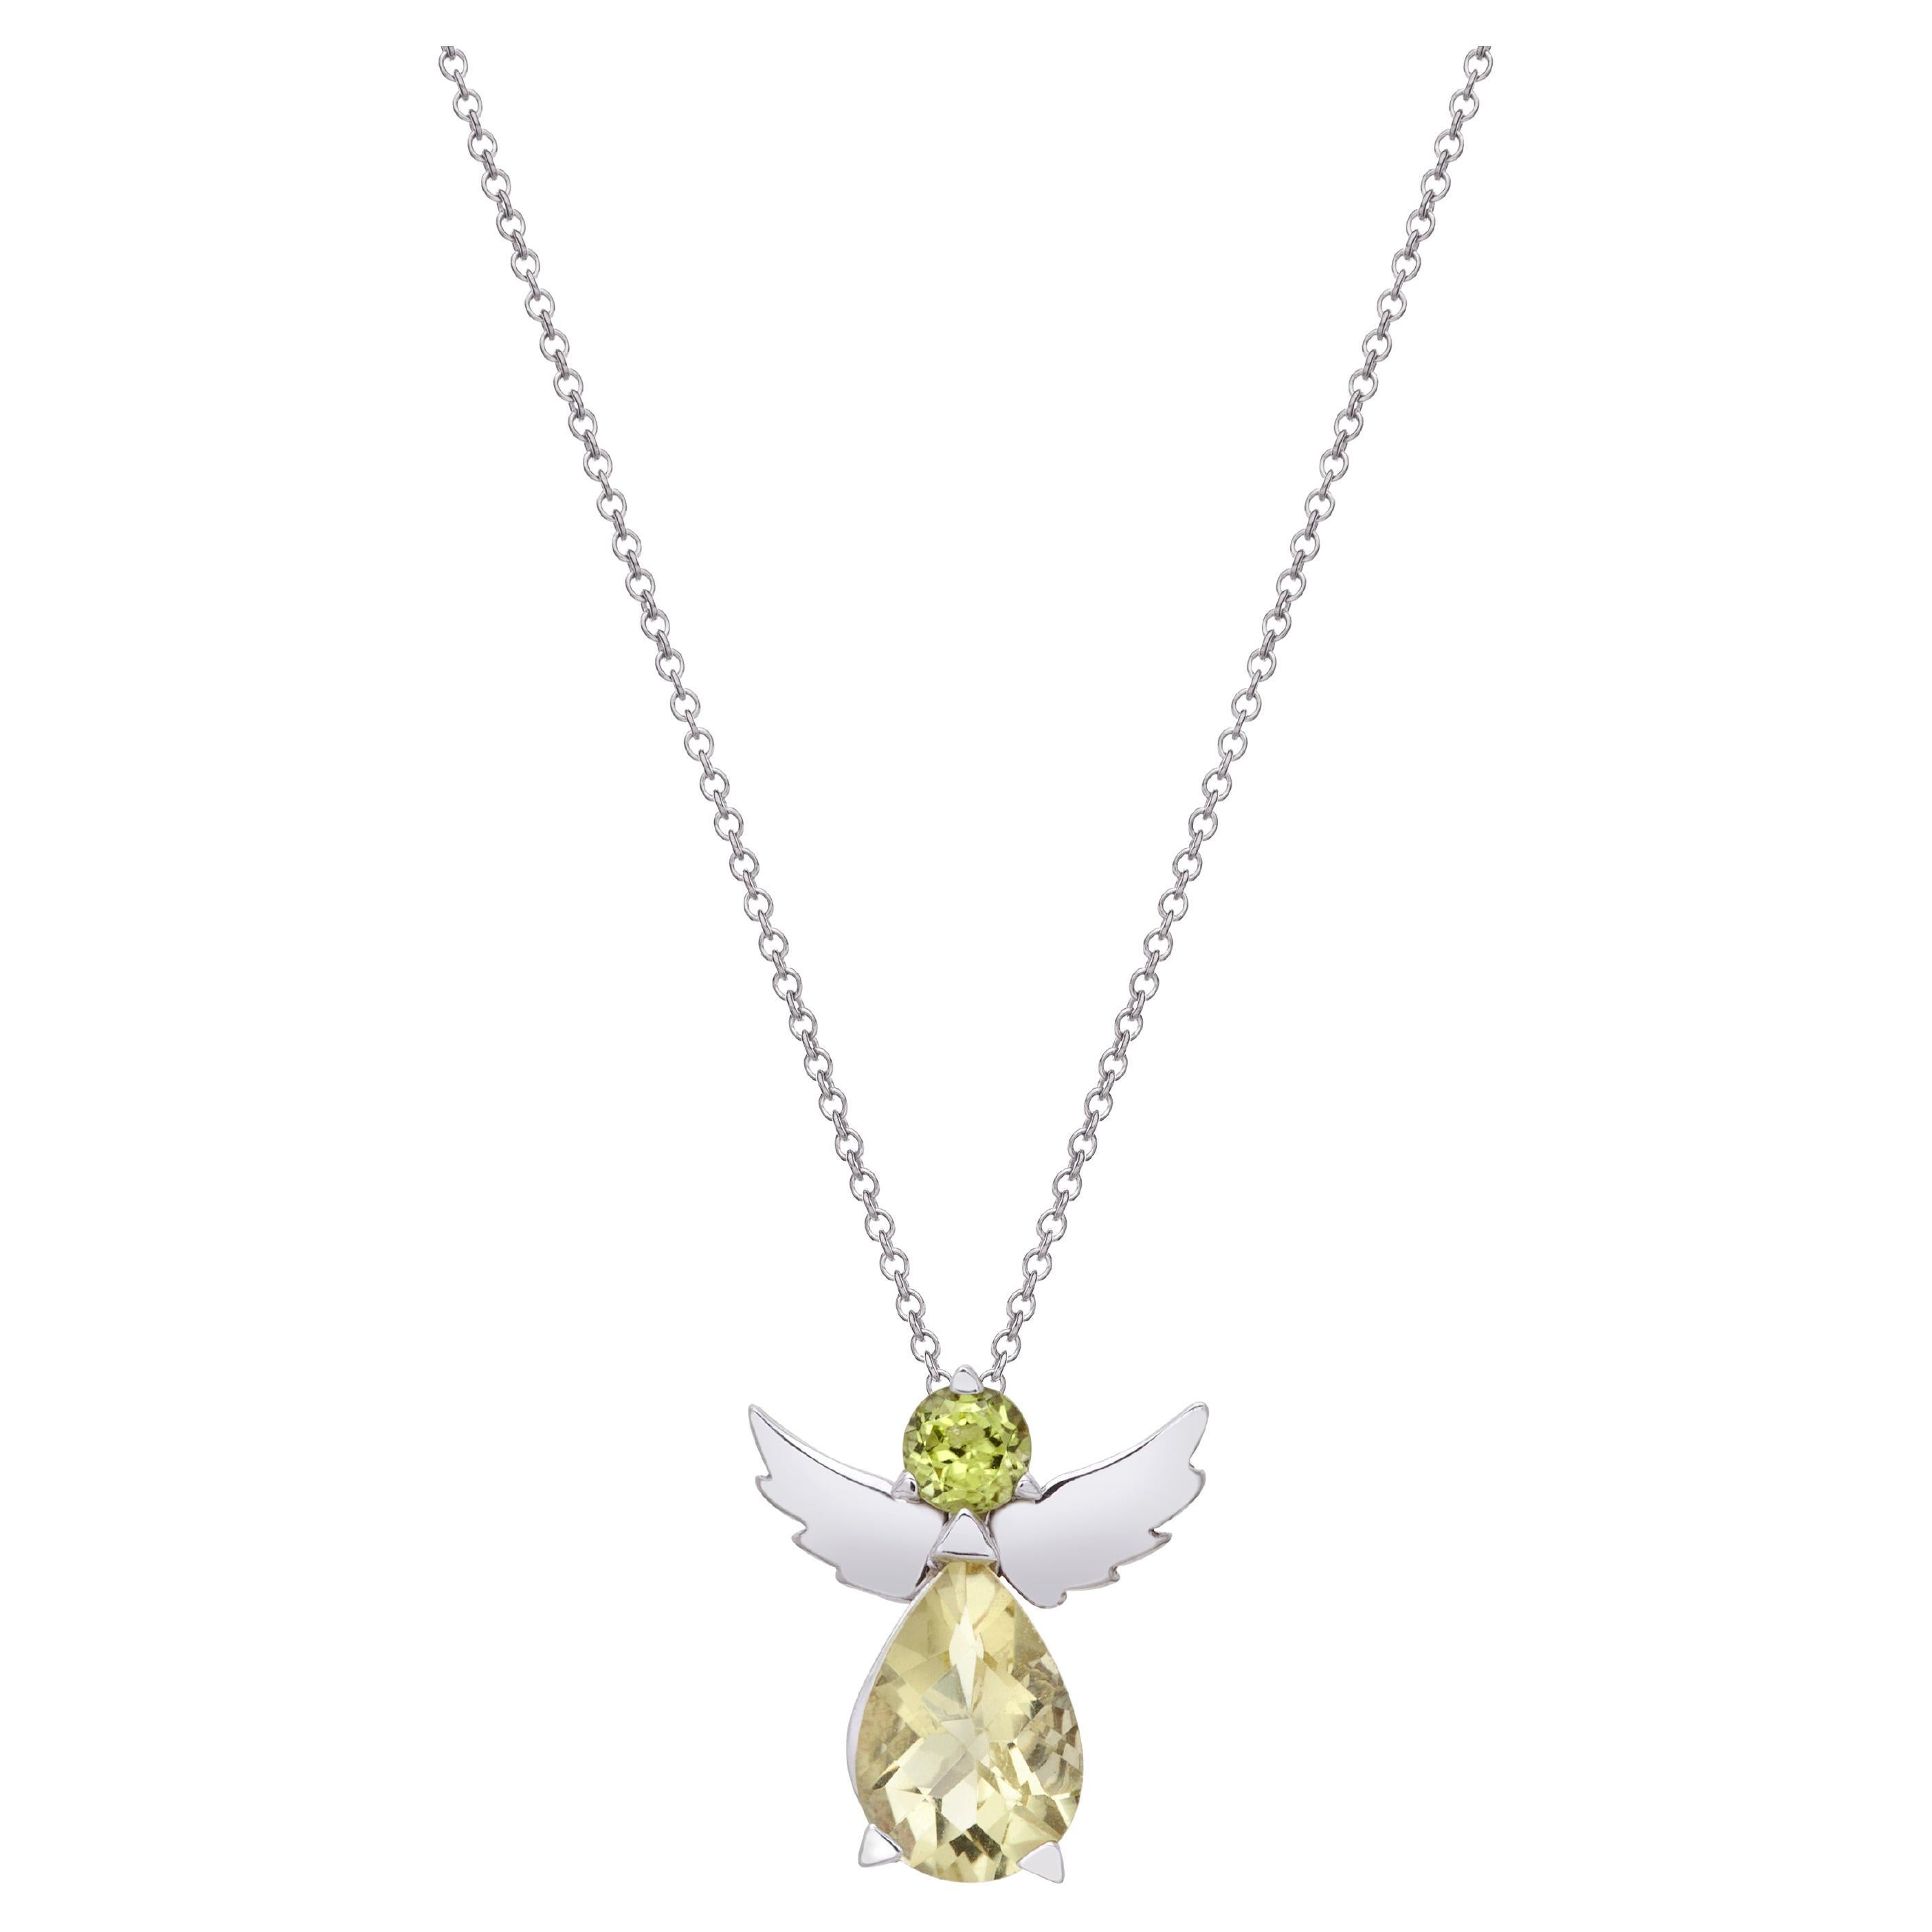 Angel Pendant Necklace in 18Kt White Gold with Green Peridot and Lemon Quartz